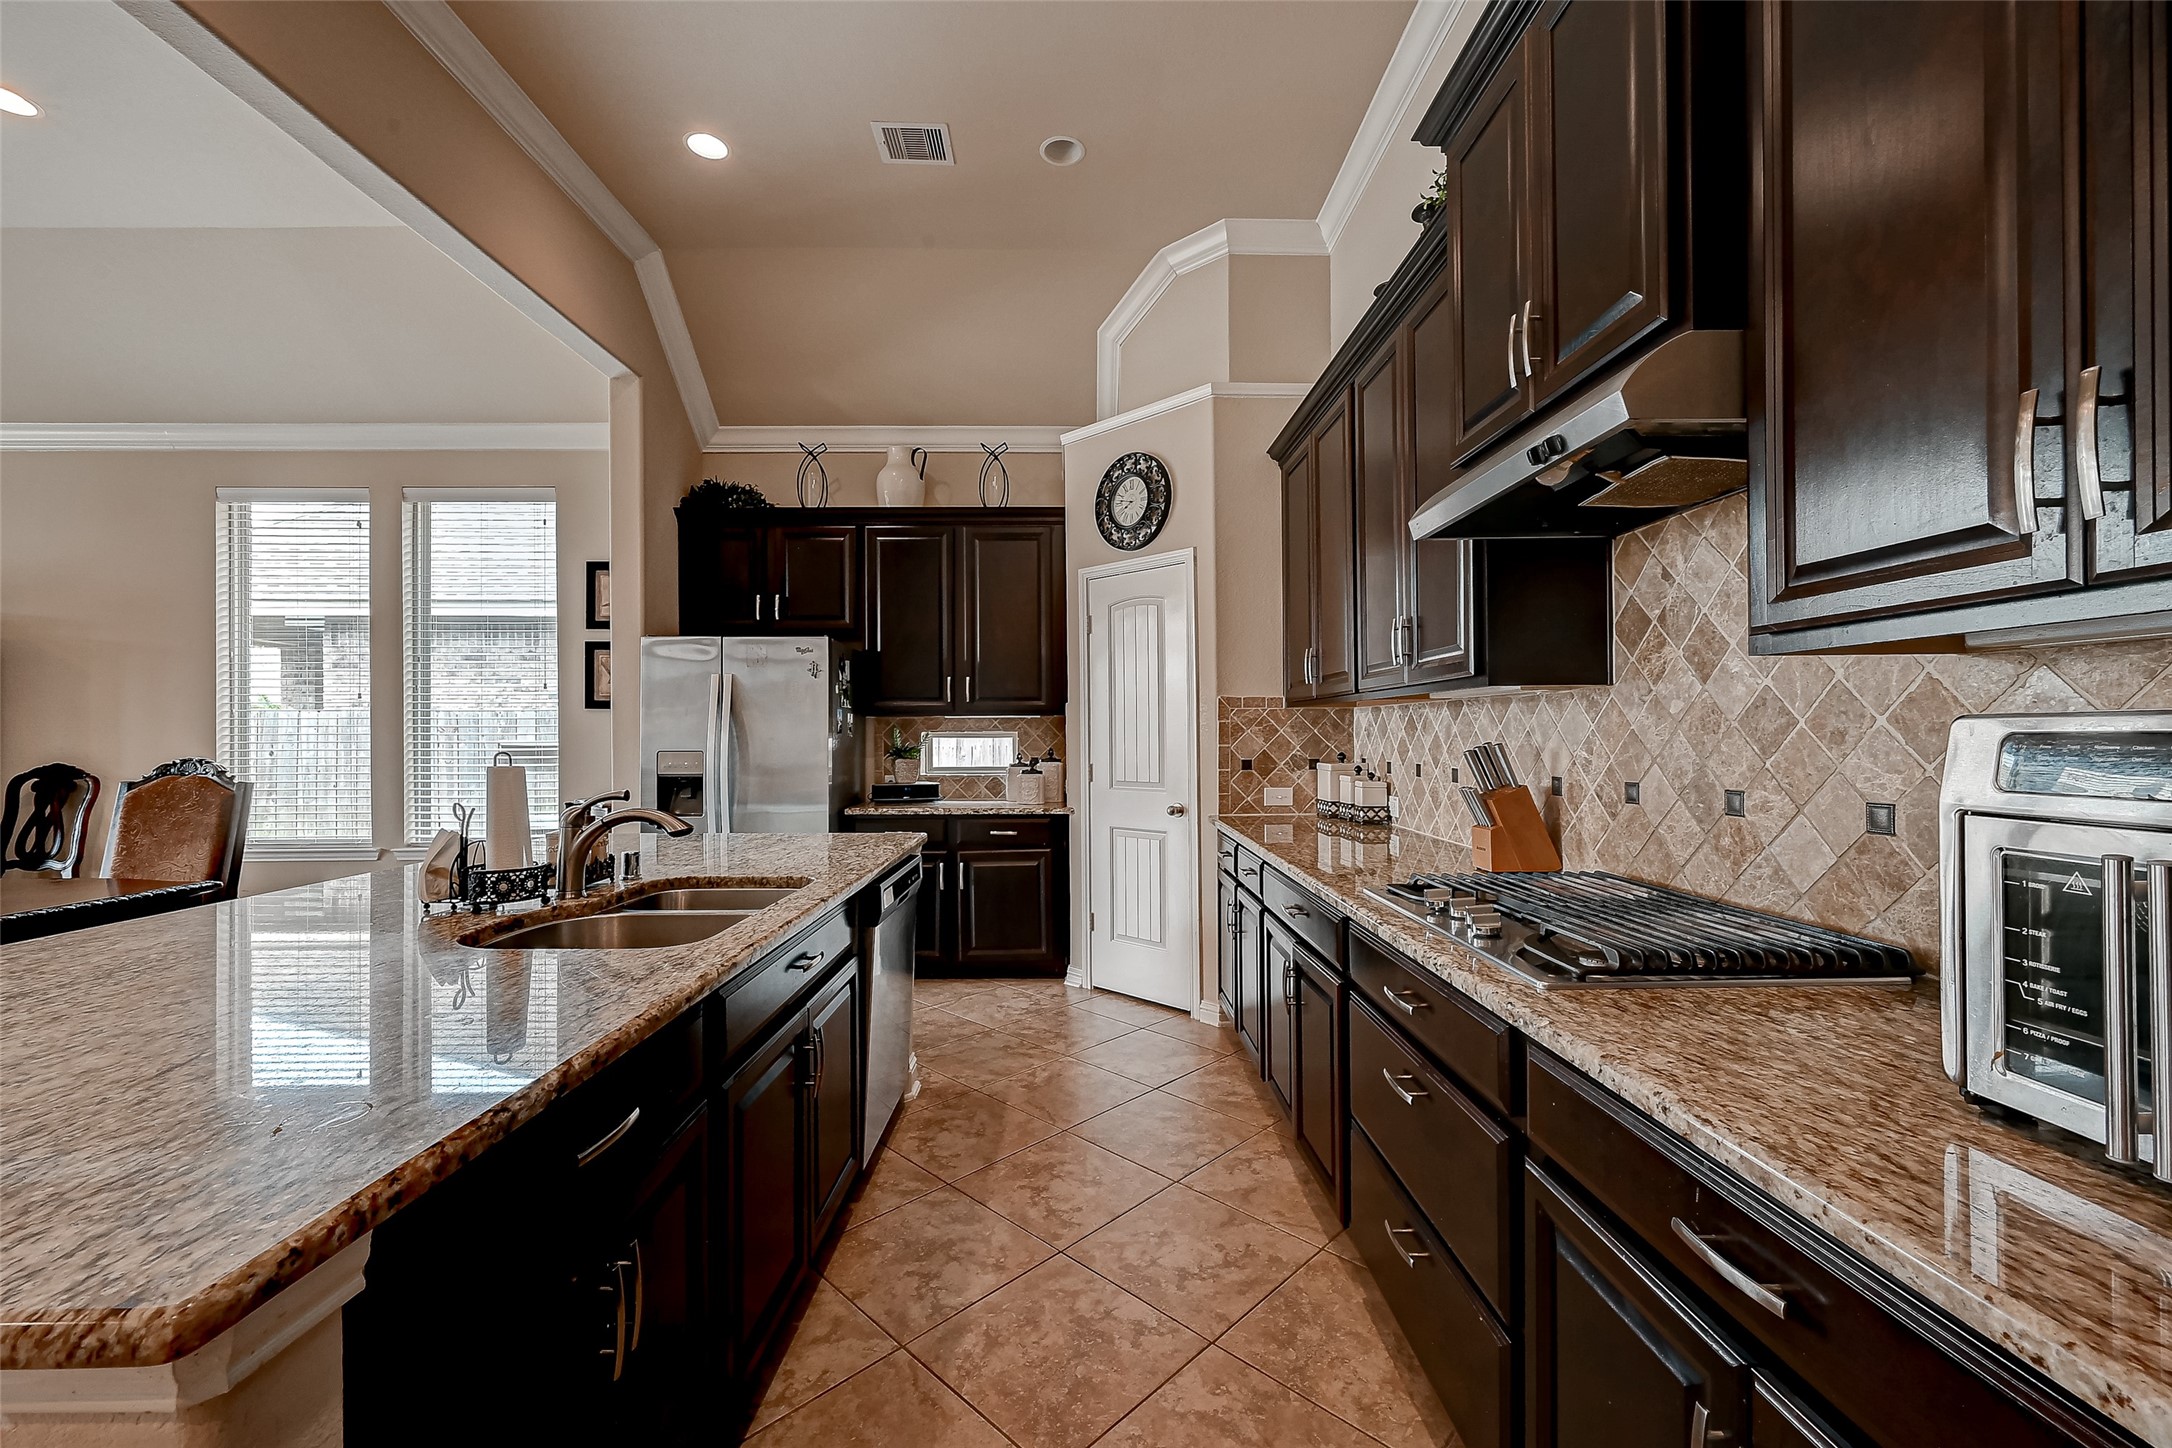 The heart of the home features a gourmet kitchen with top-of-the-line stainless steel appliances, ample storage, and an expansive center island. It's a culinary enthusiast's dream come true.